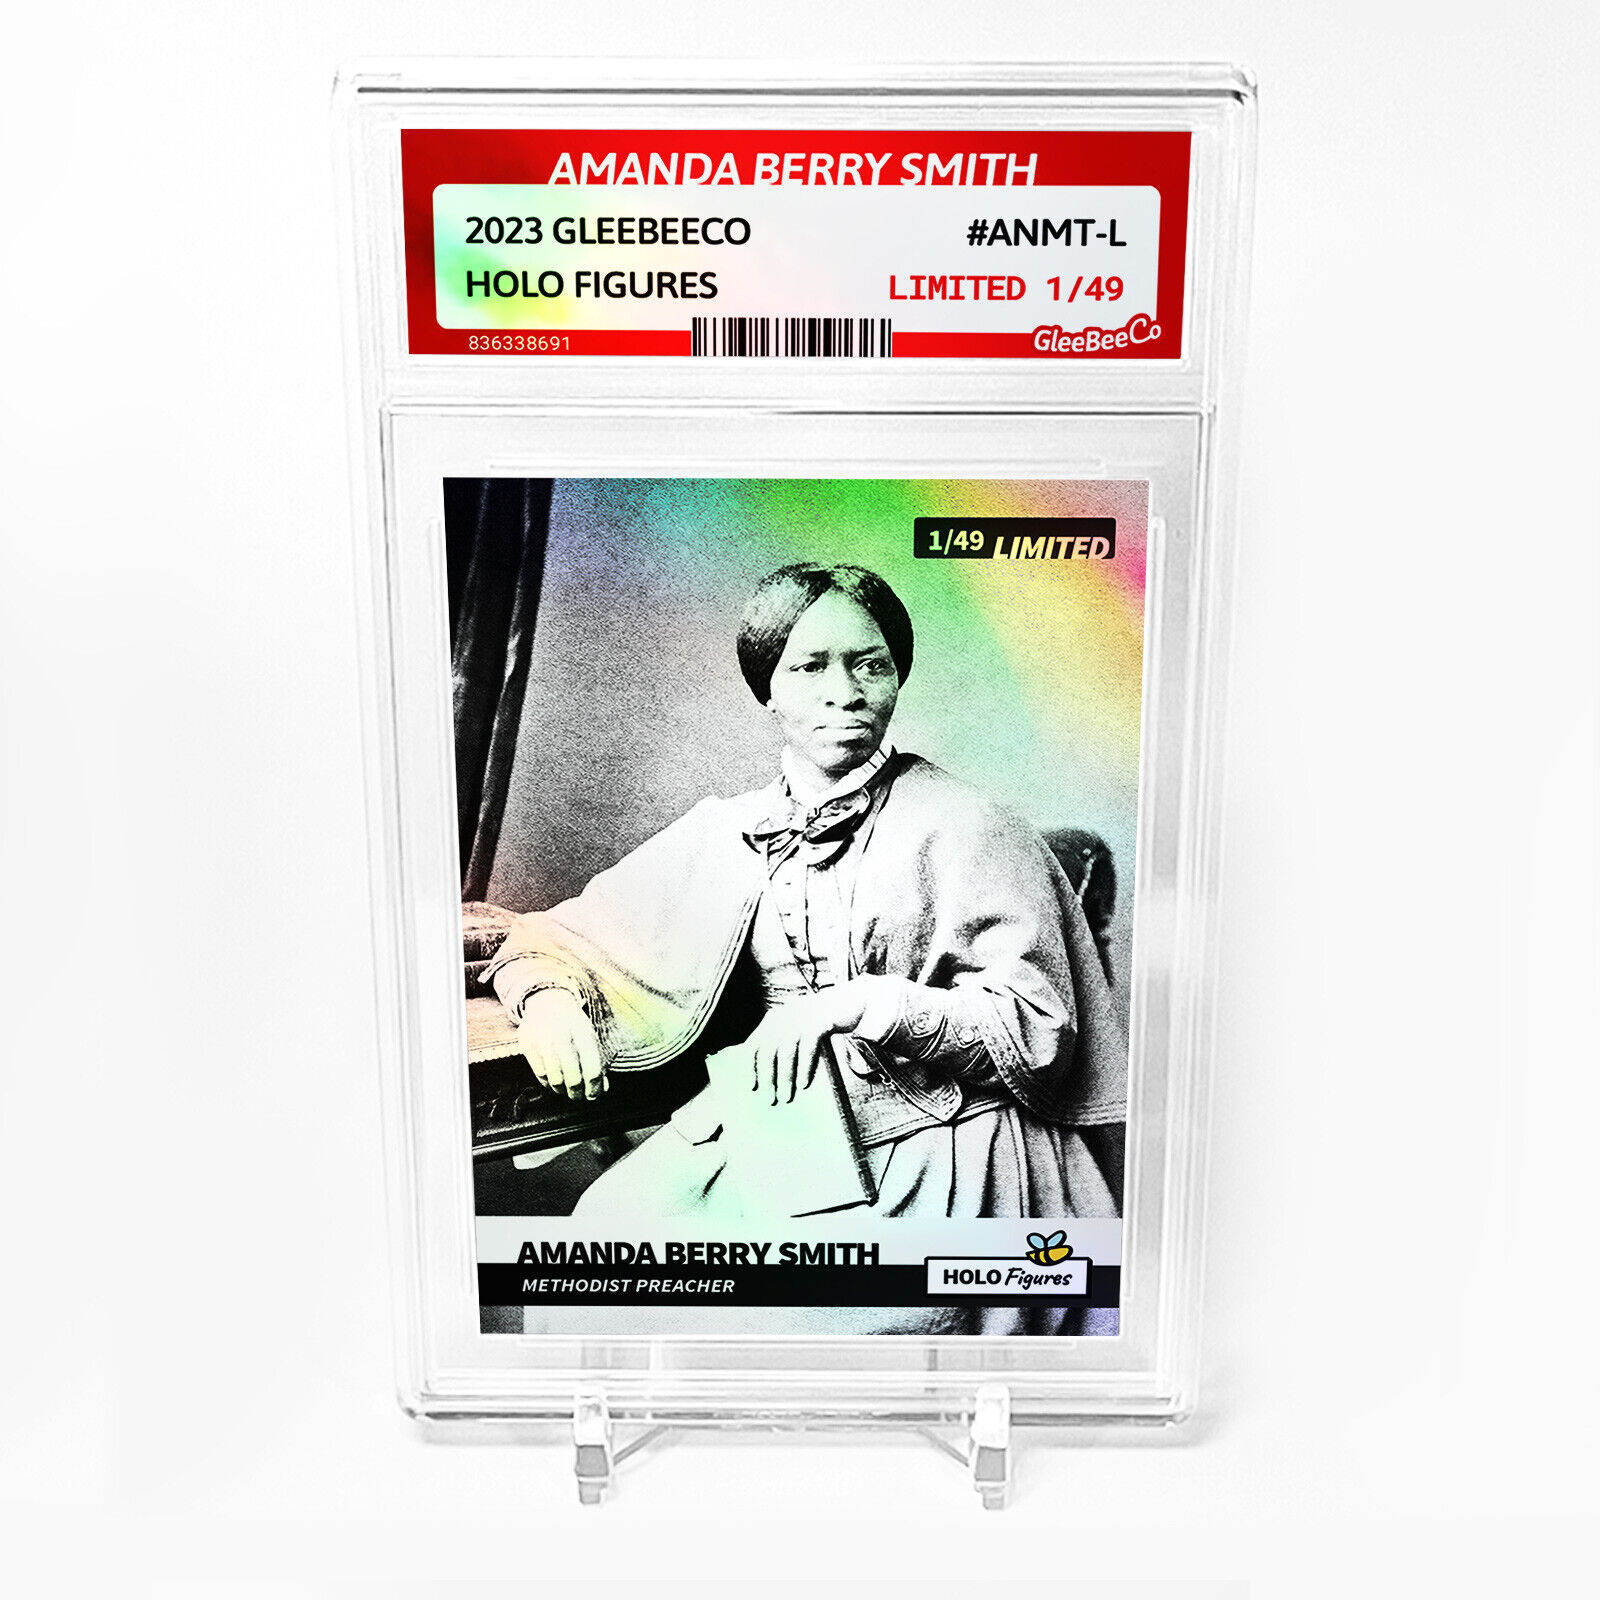 AMANDA BERRY SMITH Holographic Card 2023 GleeBeeCo Slabbed #ANMT-L Only /49